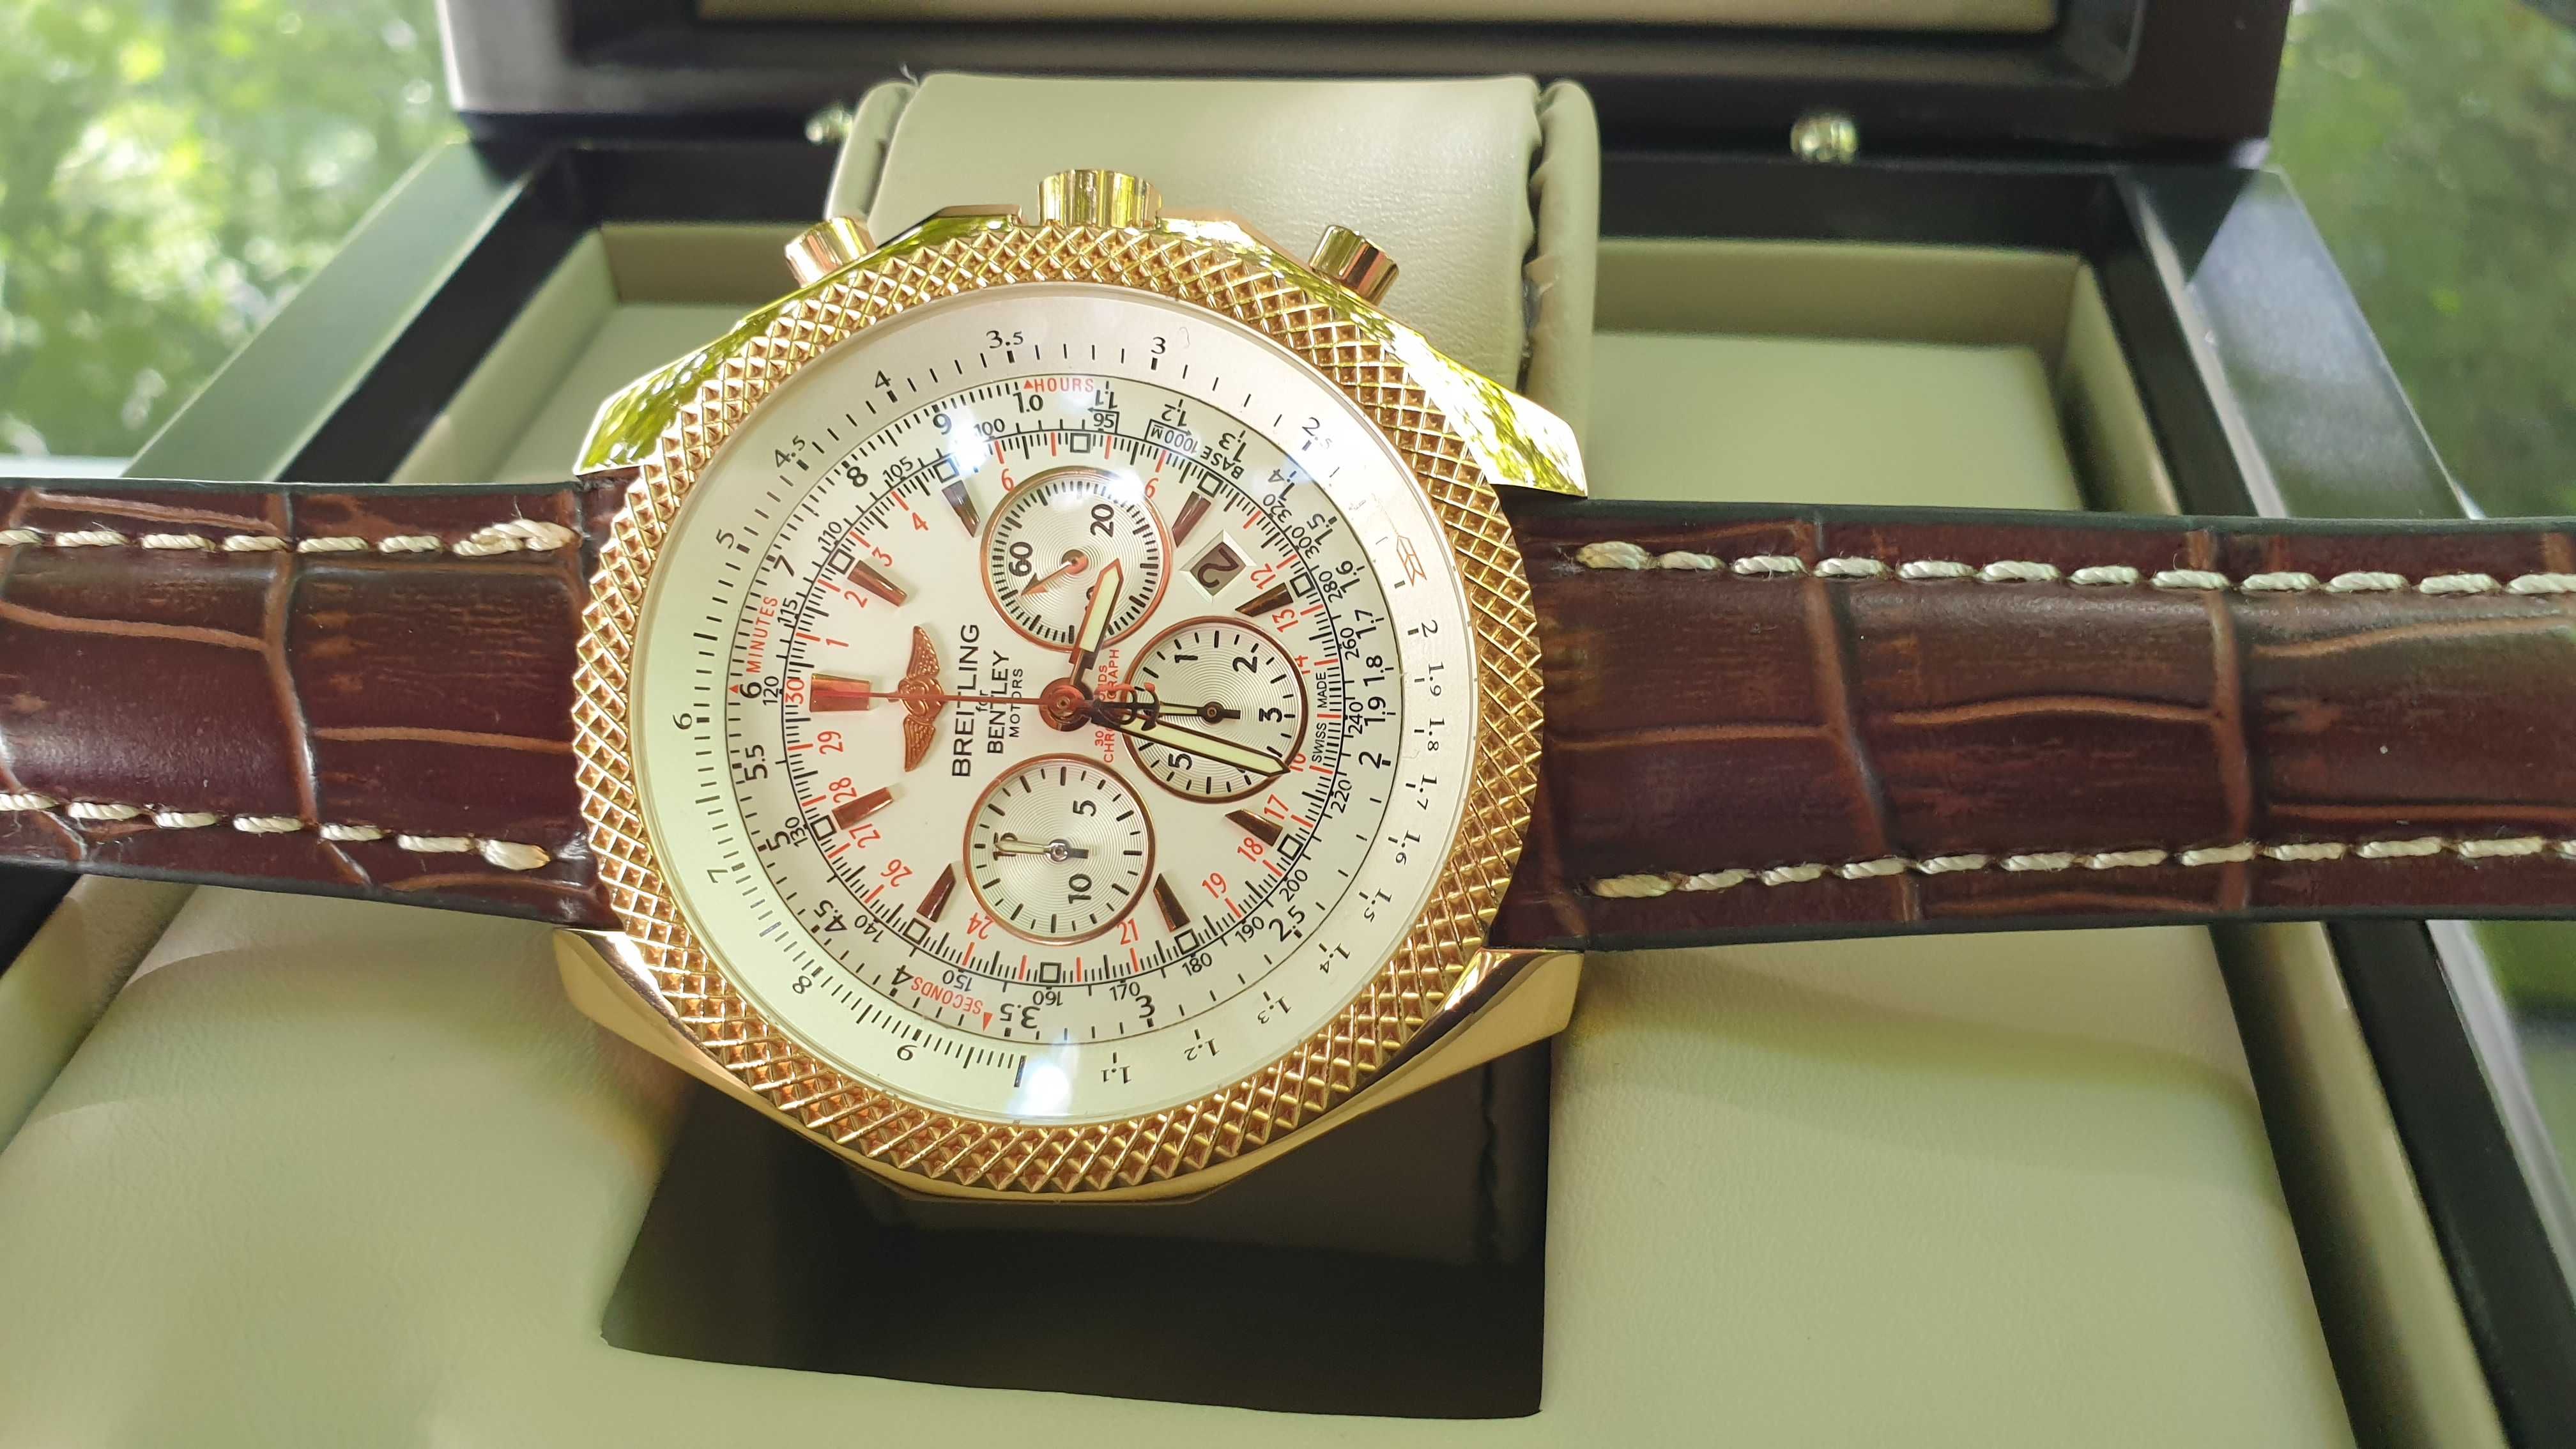 5 Breitling For Bentley Special Edition - GOLD -A25366